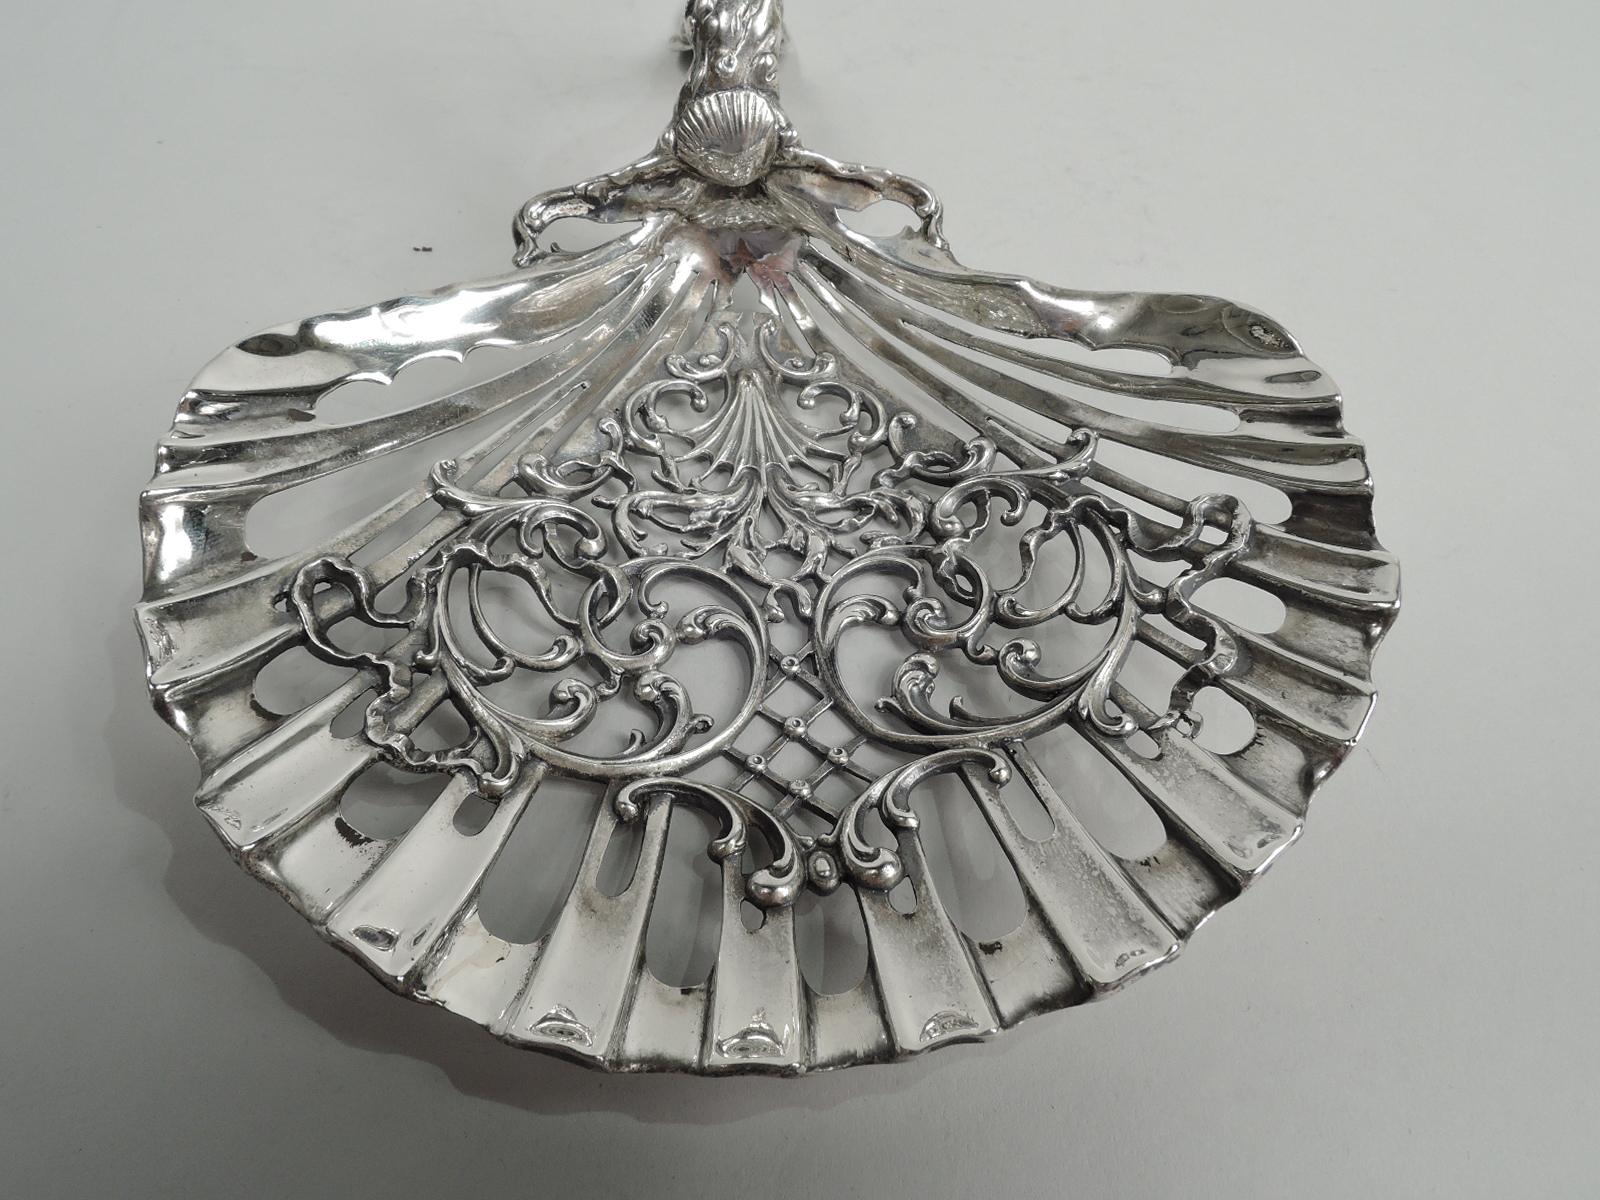 Turn-of-the-century Edwardian Art Nouveau sterling silver bonbon scoop. Scallop shell bowl with open flutes inset with open scrolls and diaper. Scroll handle comprising seaweed-entwined shells. A great piece for the weekend cottage. Fully marked